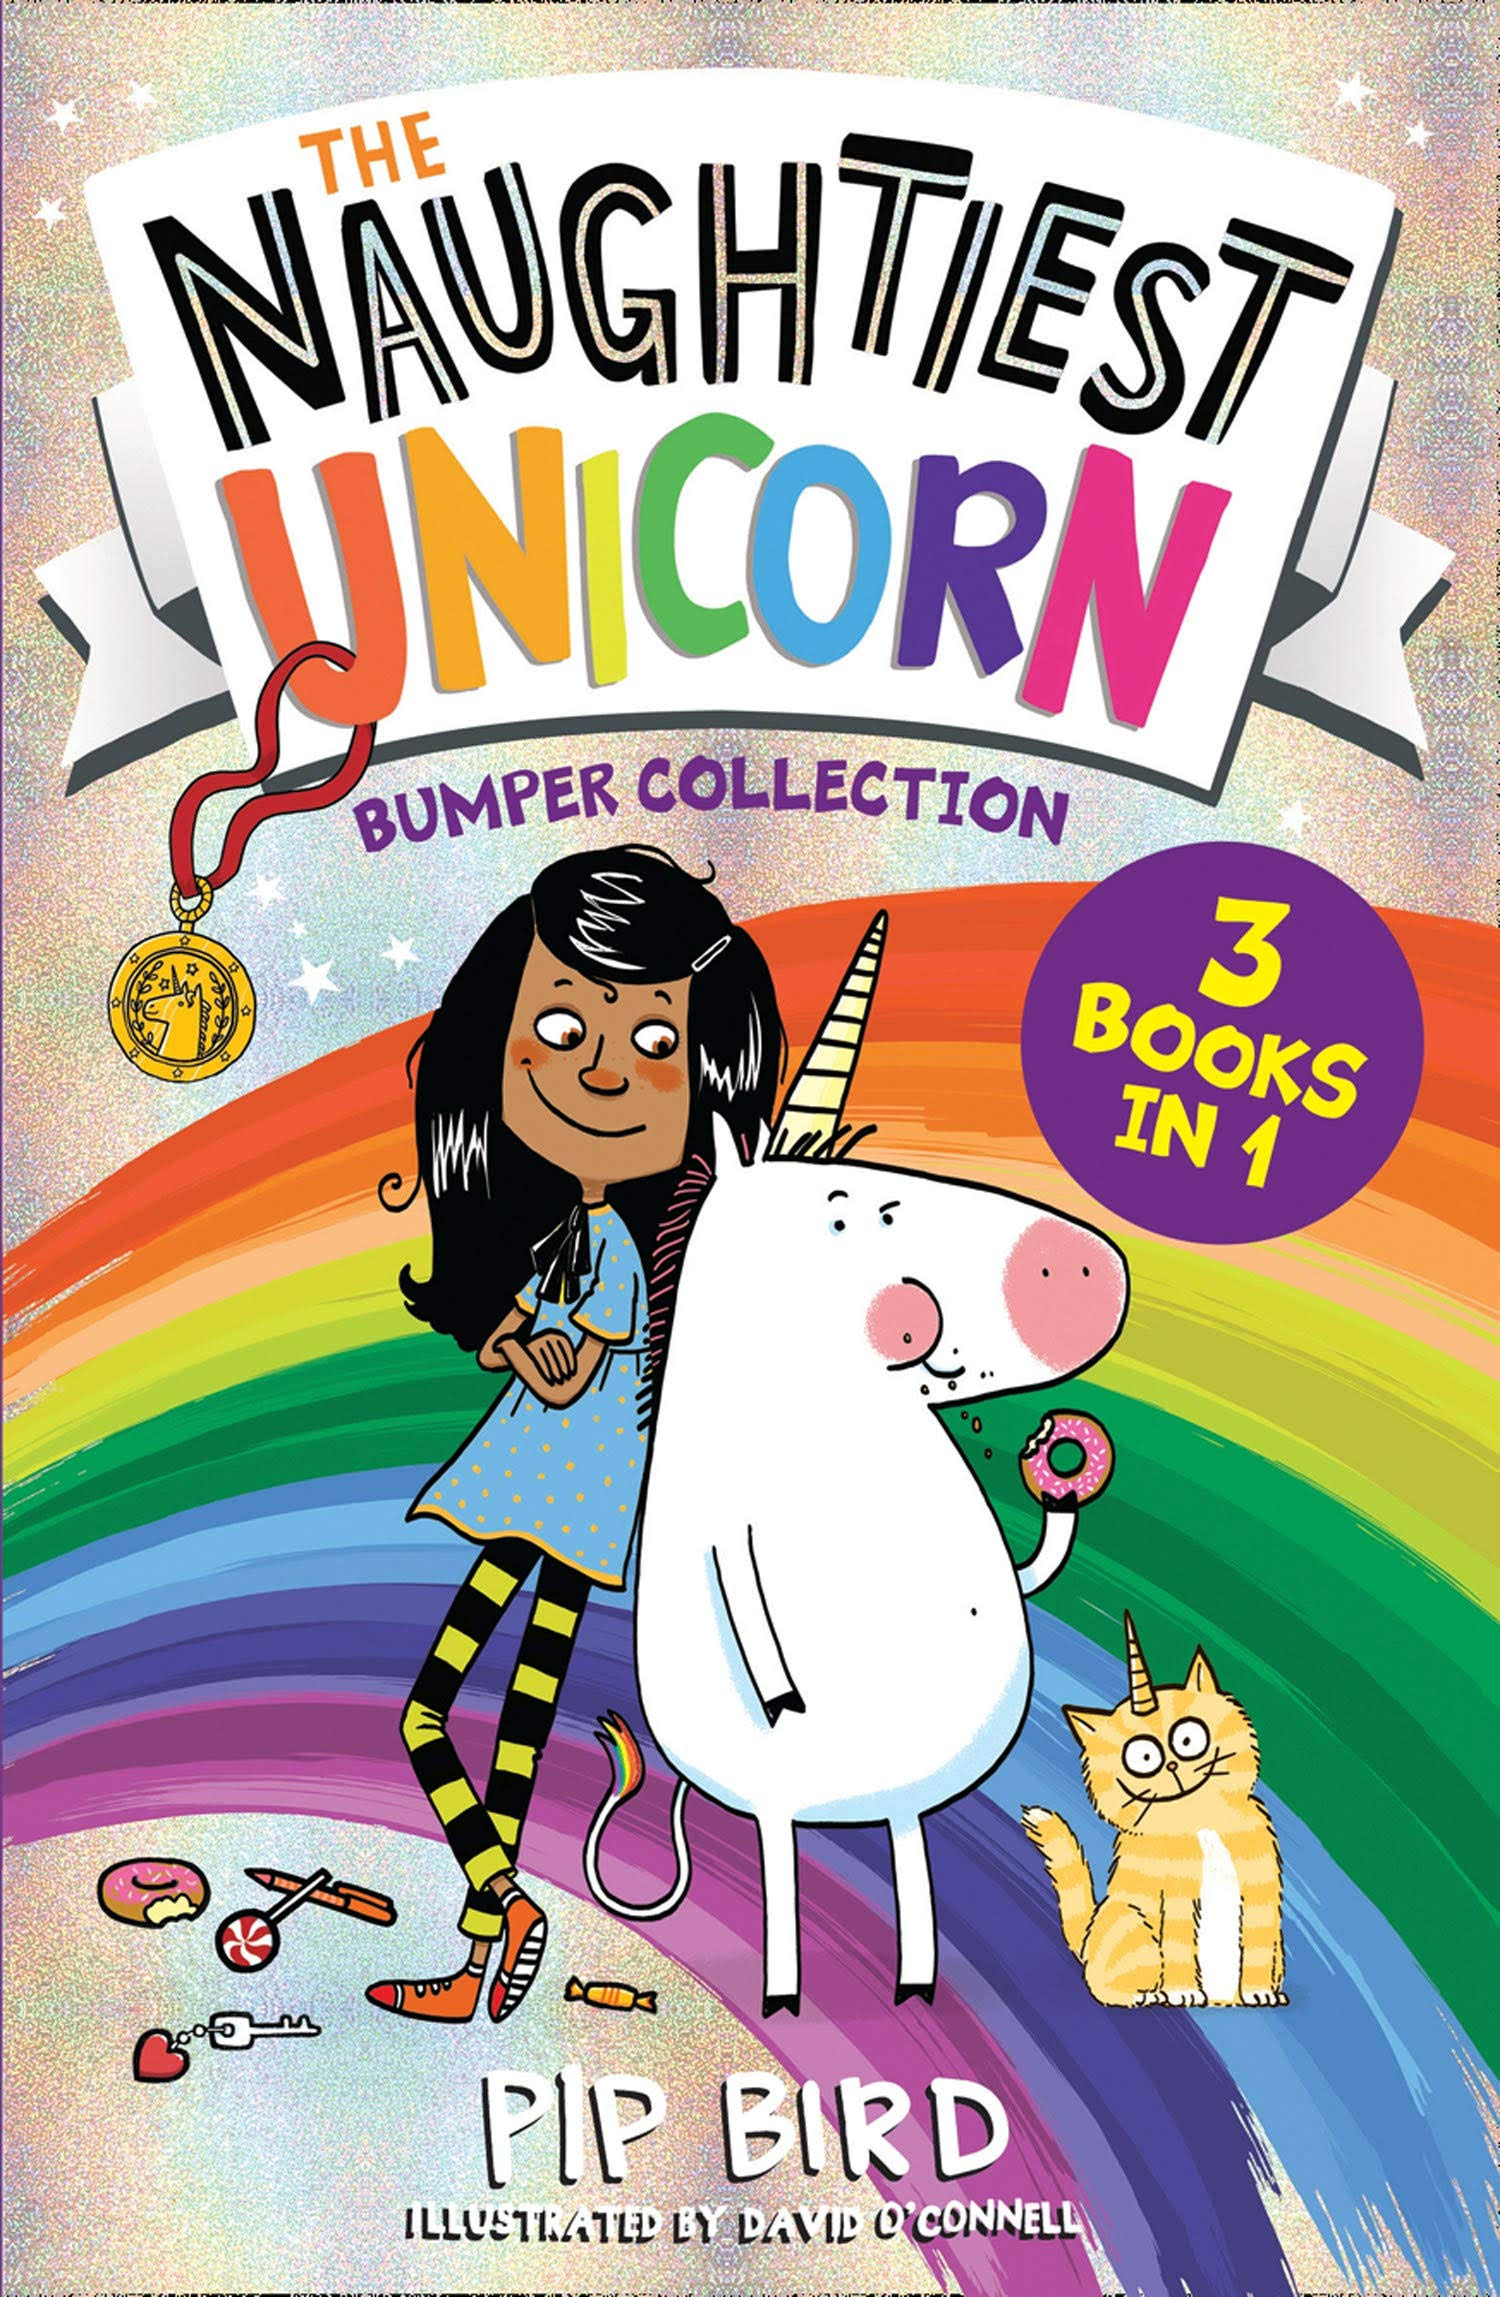 The Naughtiest Unicorn Bumper Collection [Book]